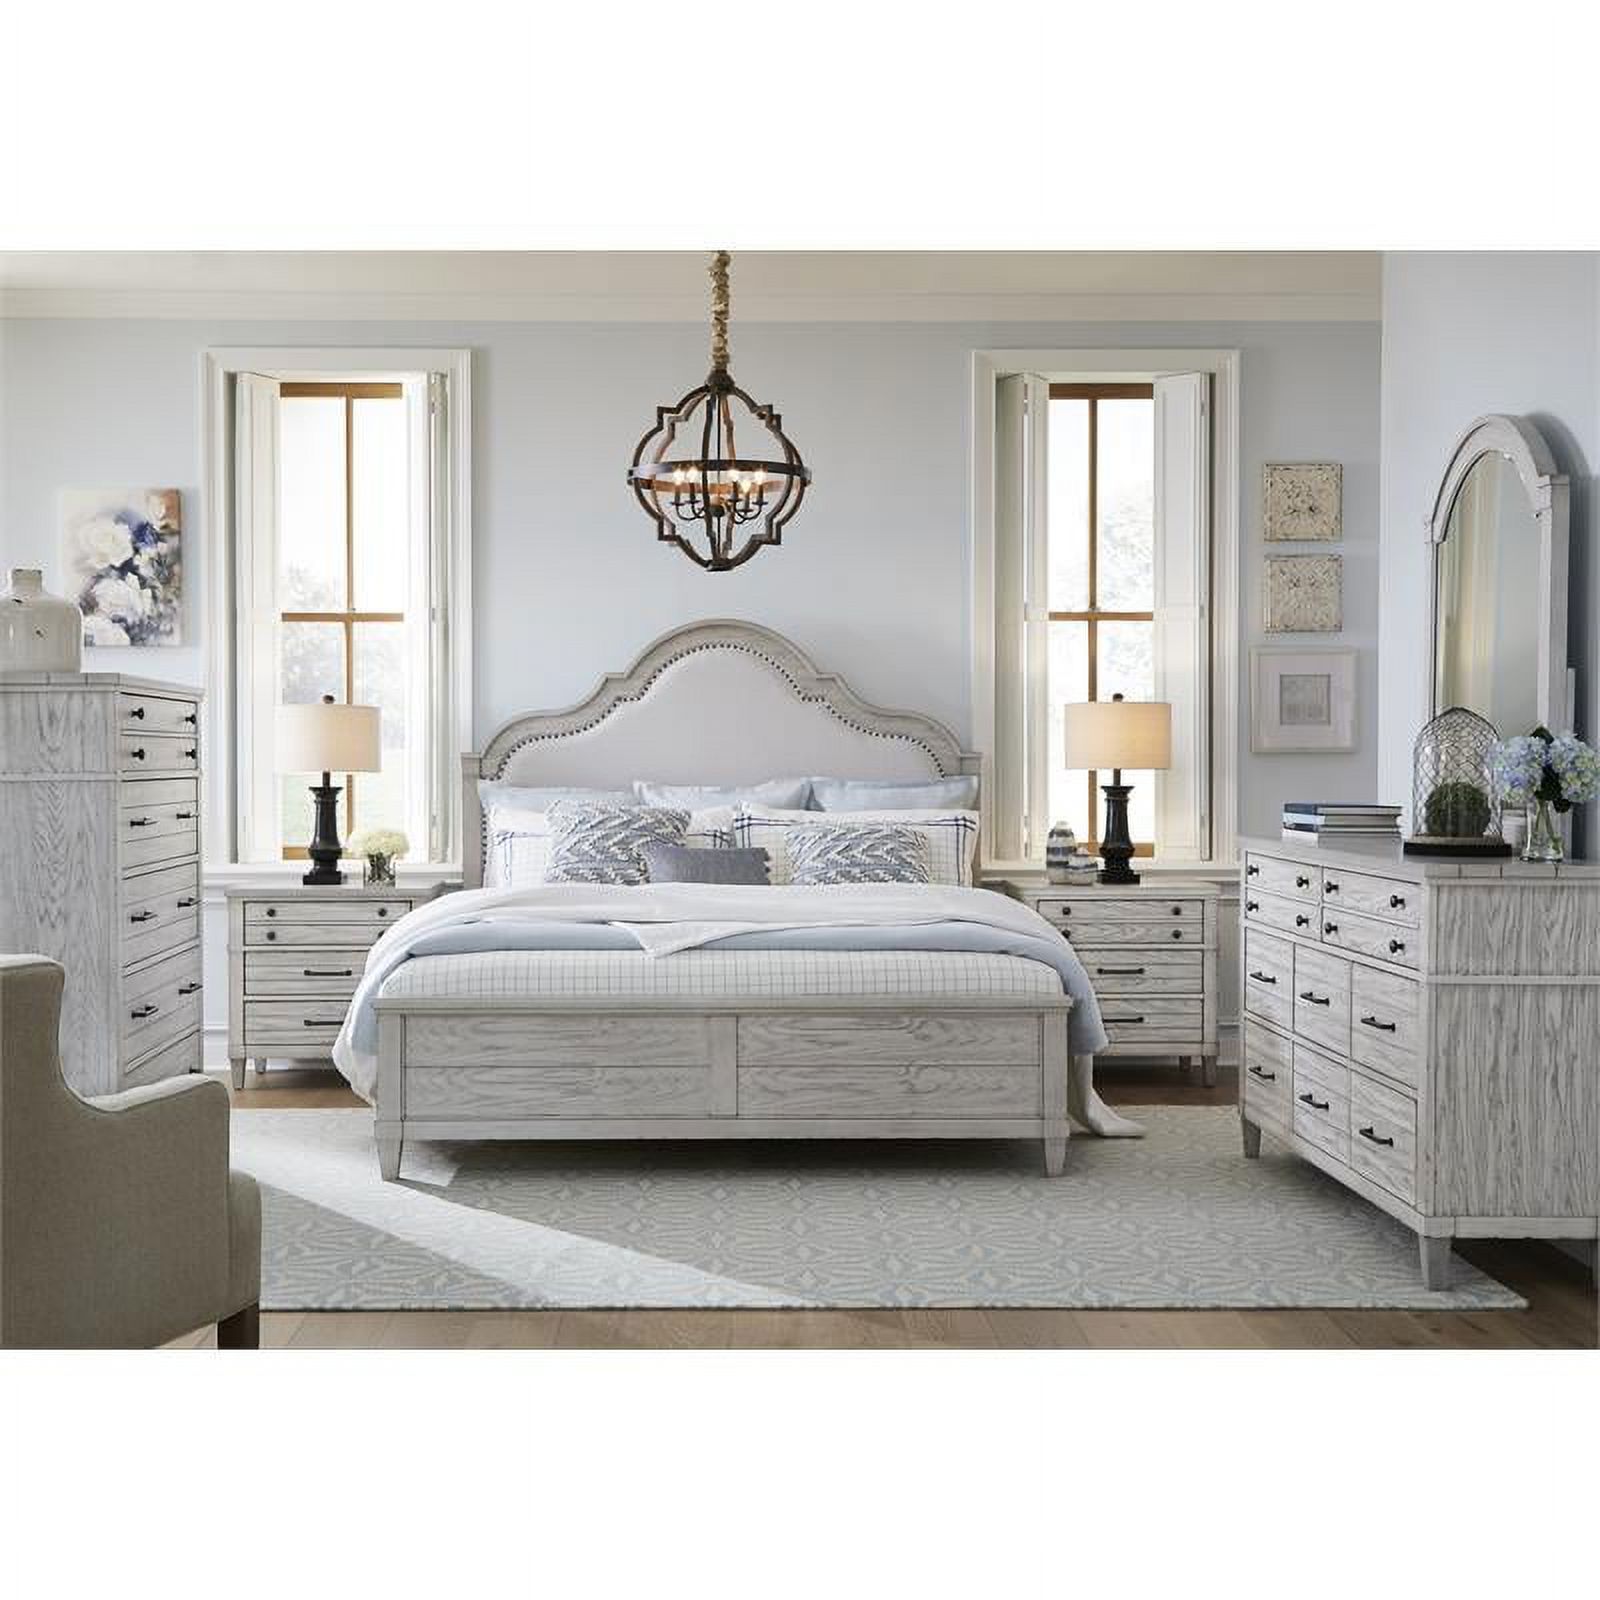 Belhaven Queen Upholstered Panel Bed  in Weathered Plank Finish Wood - image 3 of 11